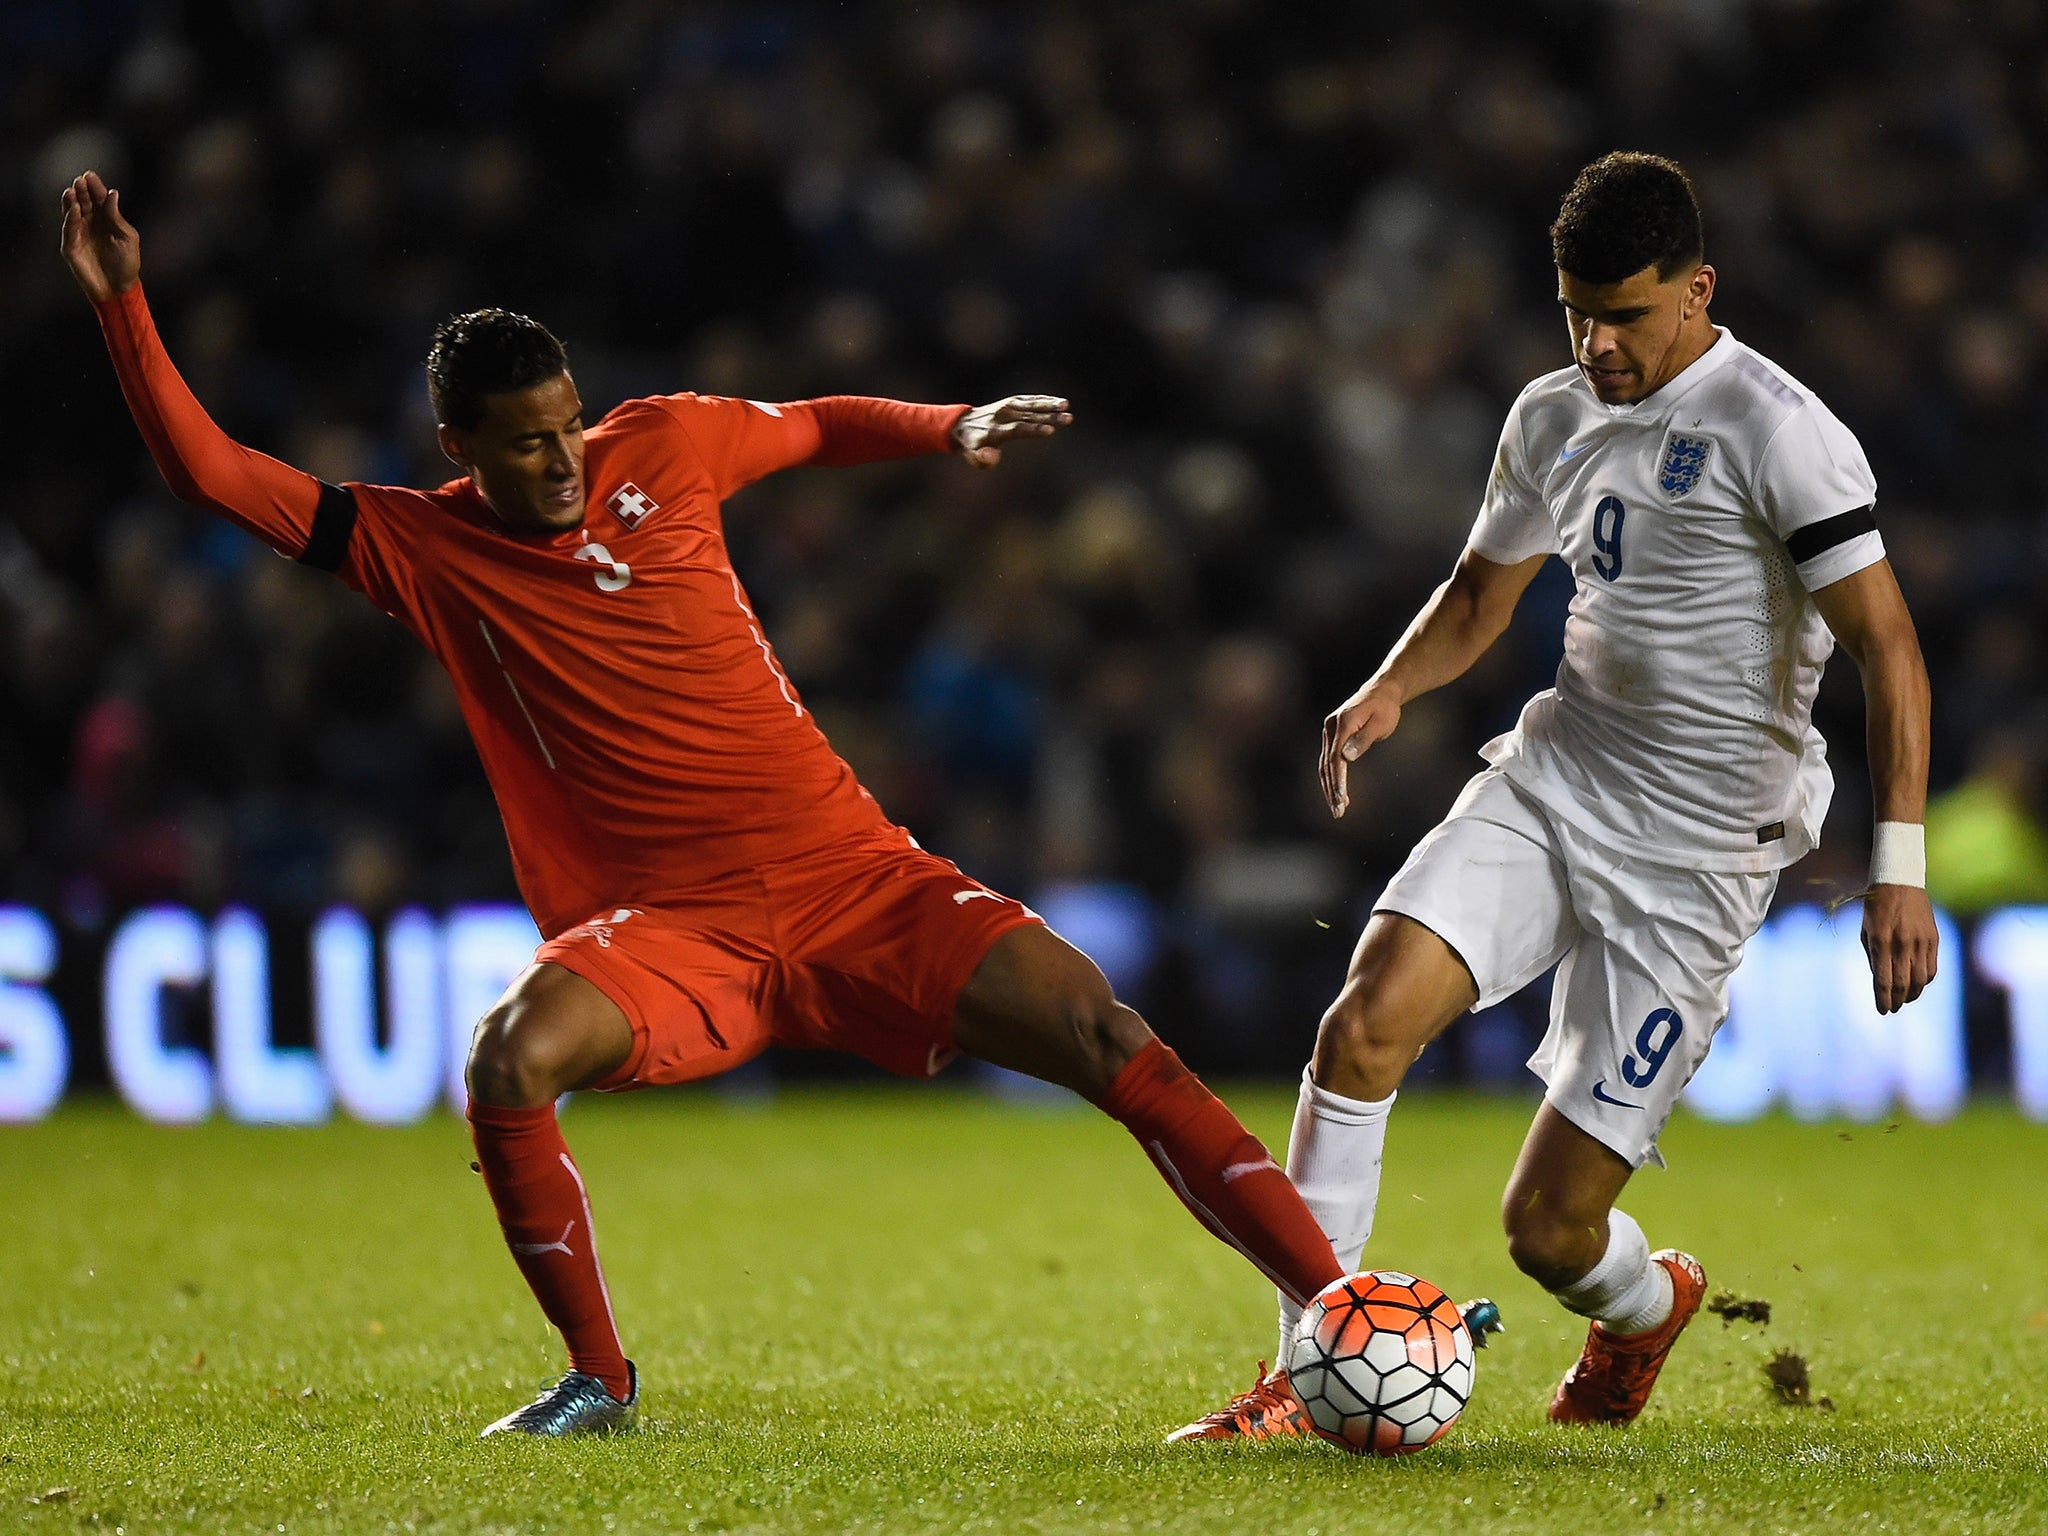 Solanke is an England youth international but wants a path to senior football